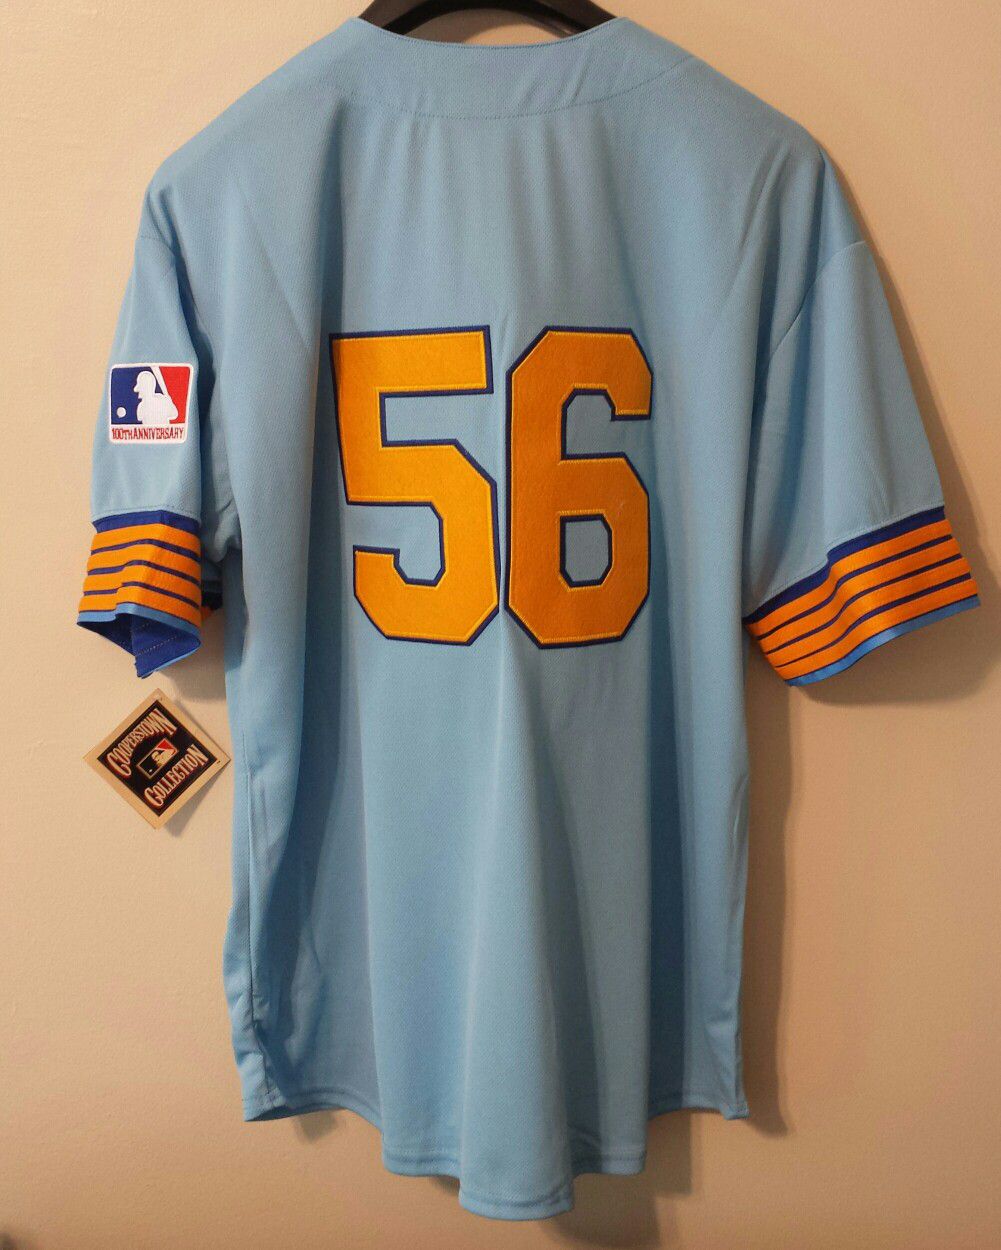 Jim Bouton 1969 Seattle Pilots Jersey for Sale in Queens, NY - OfferUp